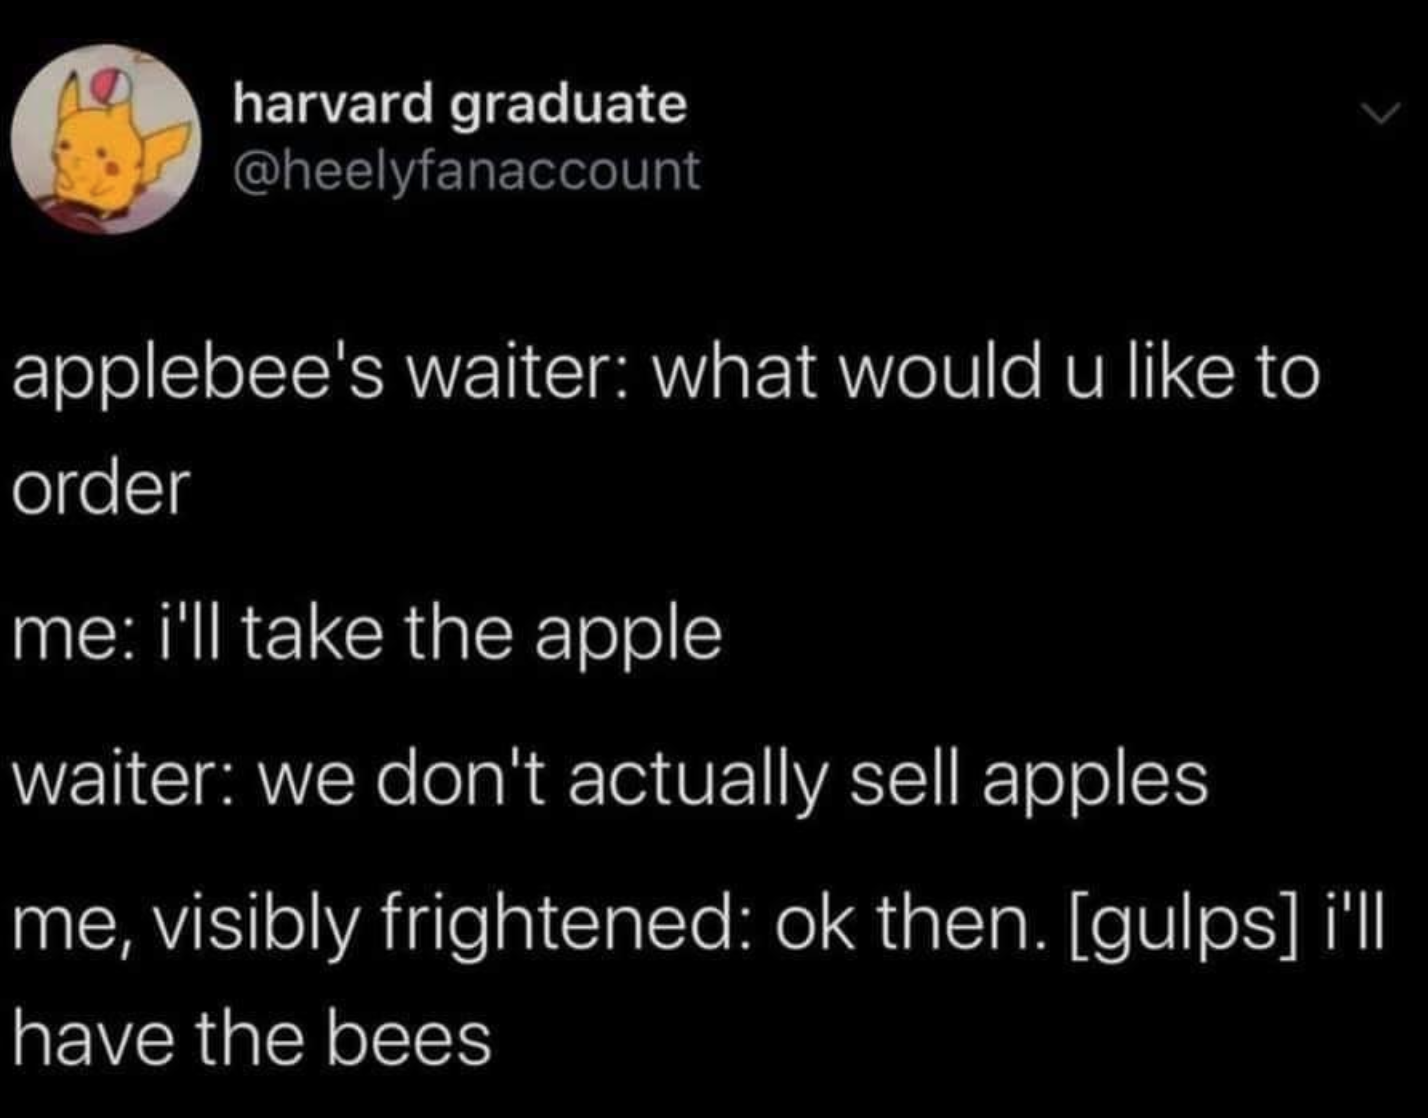 night by elie wiesel - harvard graduate applebee's waiter what would u to order me i'll take the apple waiter we don't actually sell apples me, visibly frightened ok then. gulps i'll have the bees